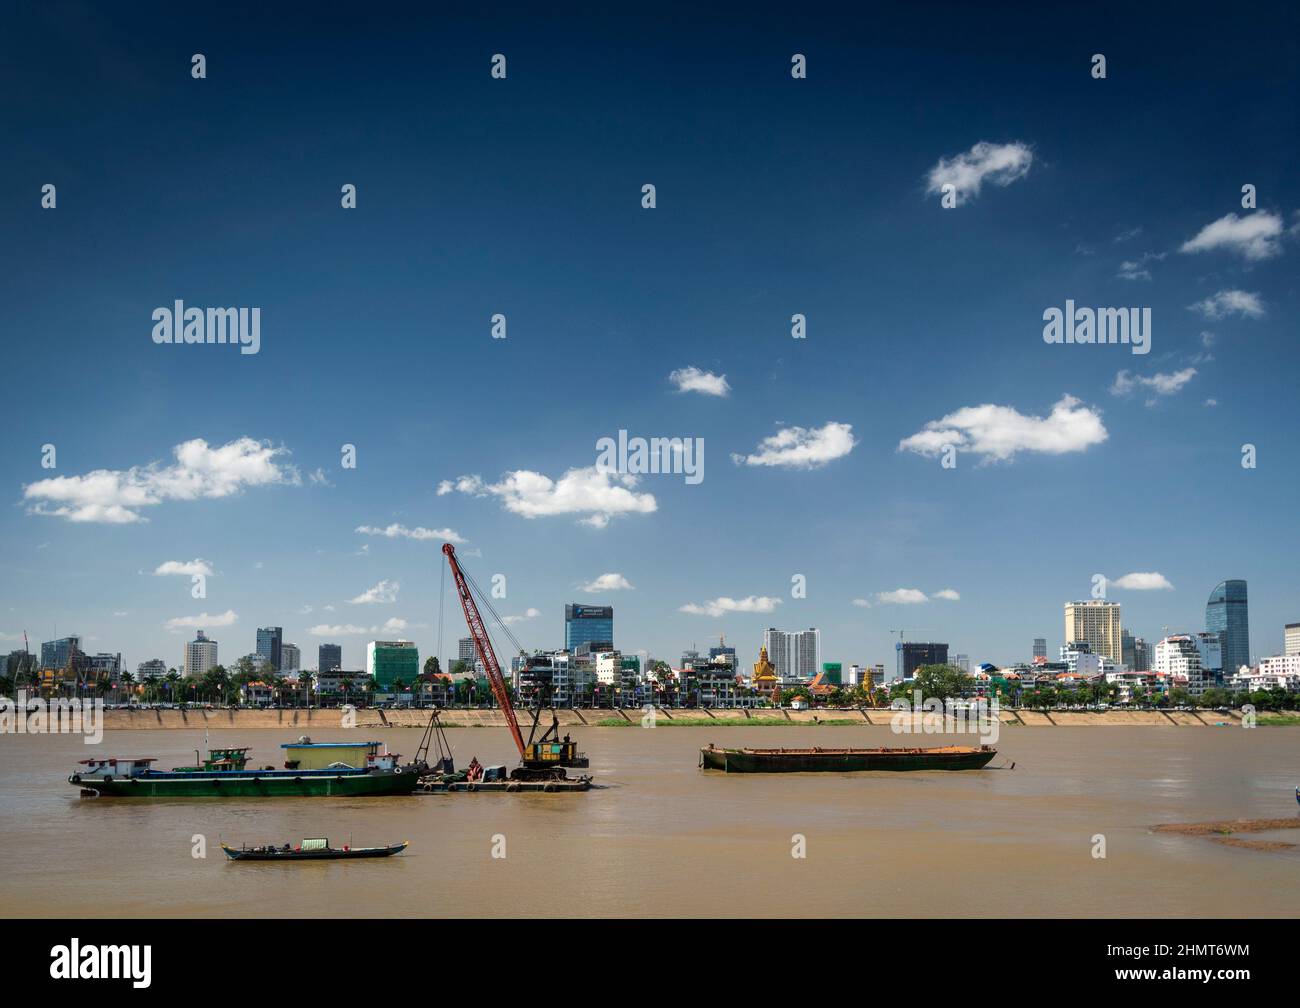 sand dredging boats on the Tonle Sap river with Phnom Penh city skyline in Cambodia Stock Photo